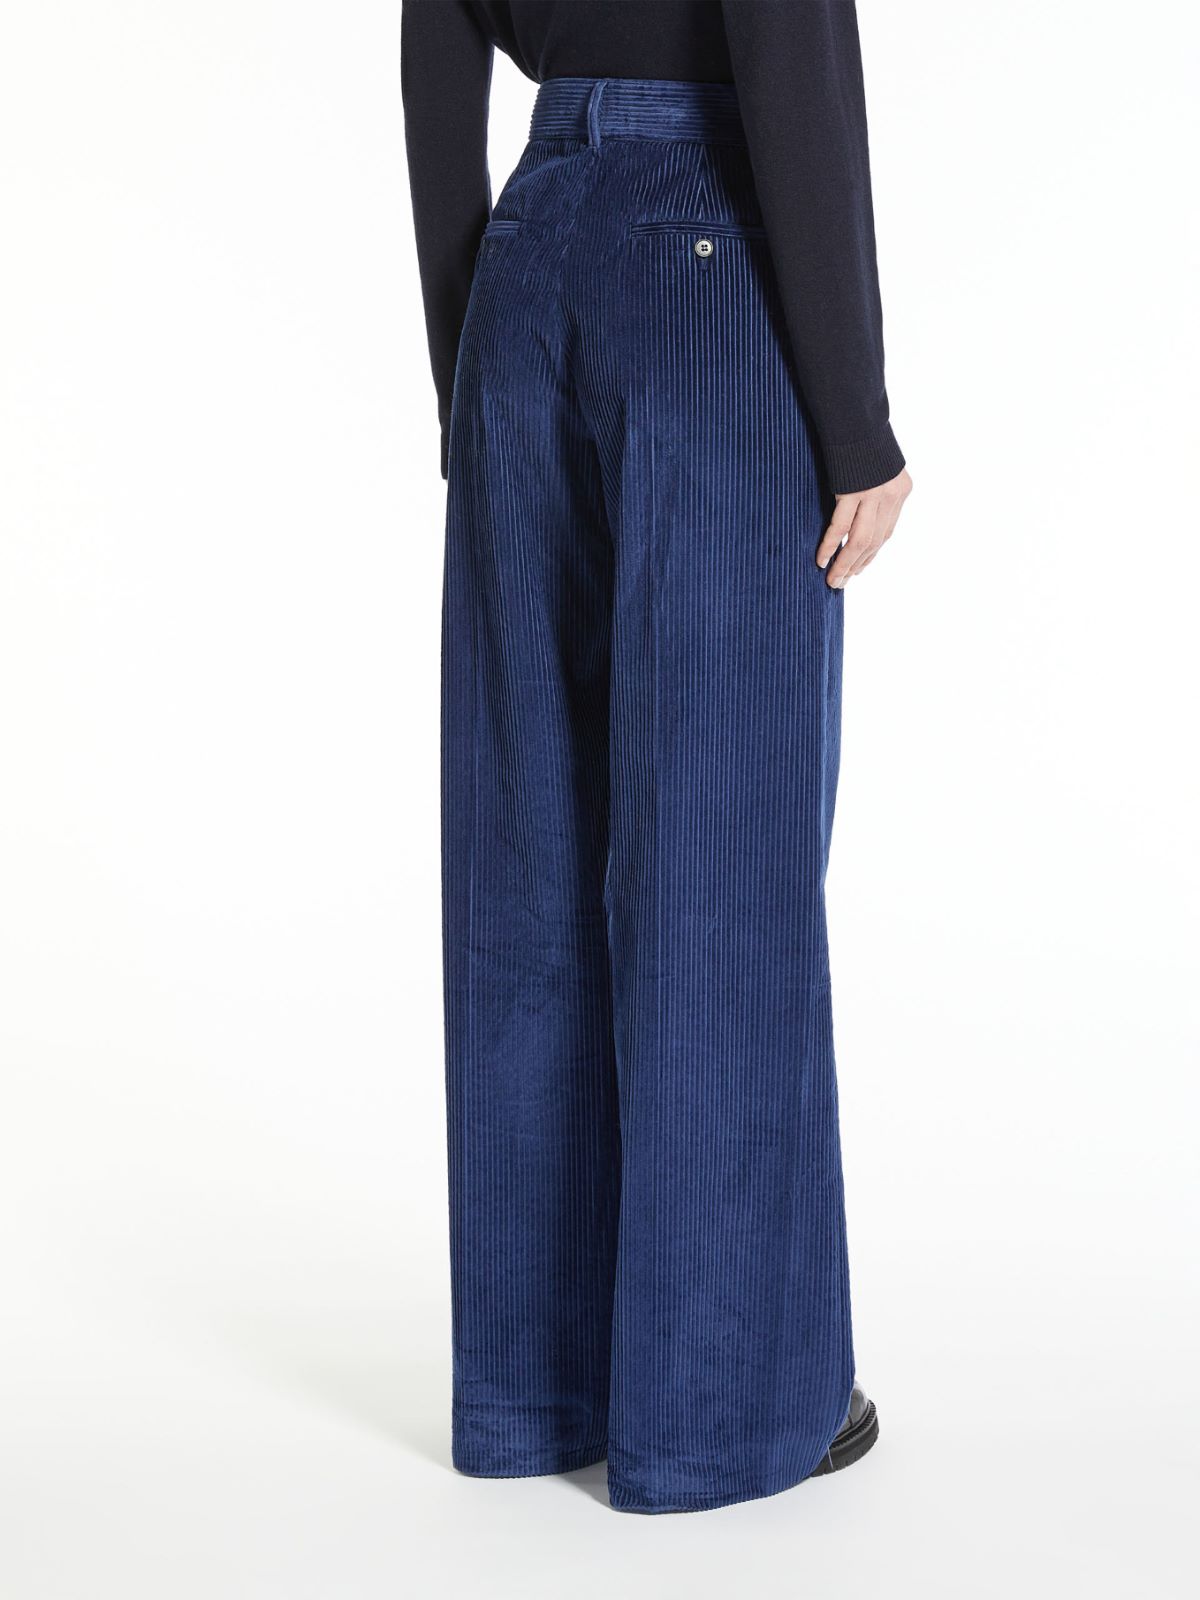 Cotton velvet trousers, china blue | Weekend Max Mara